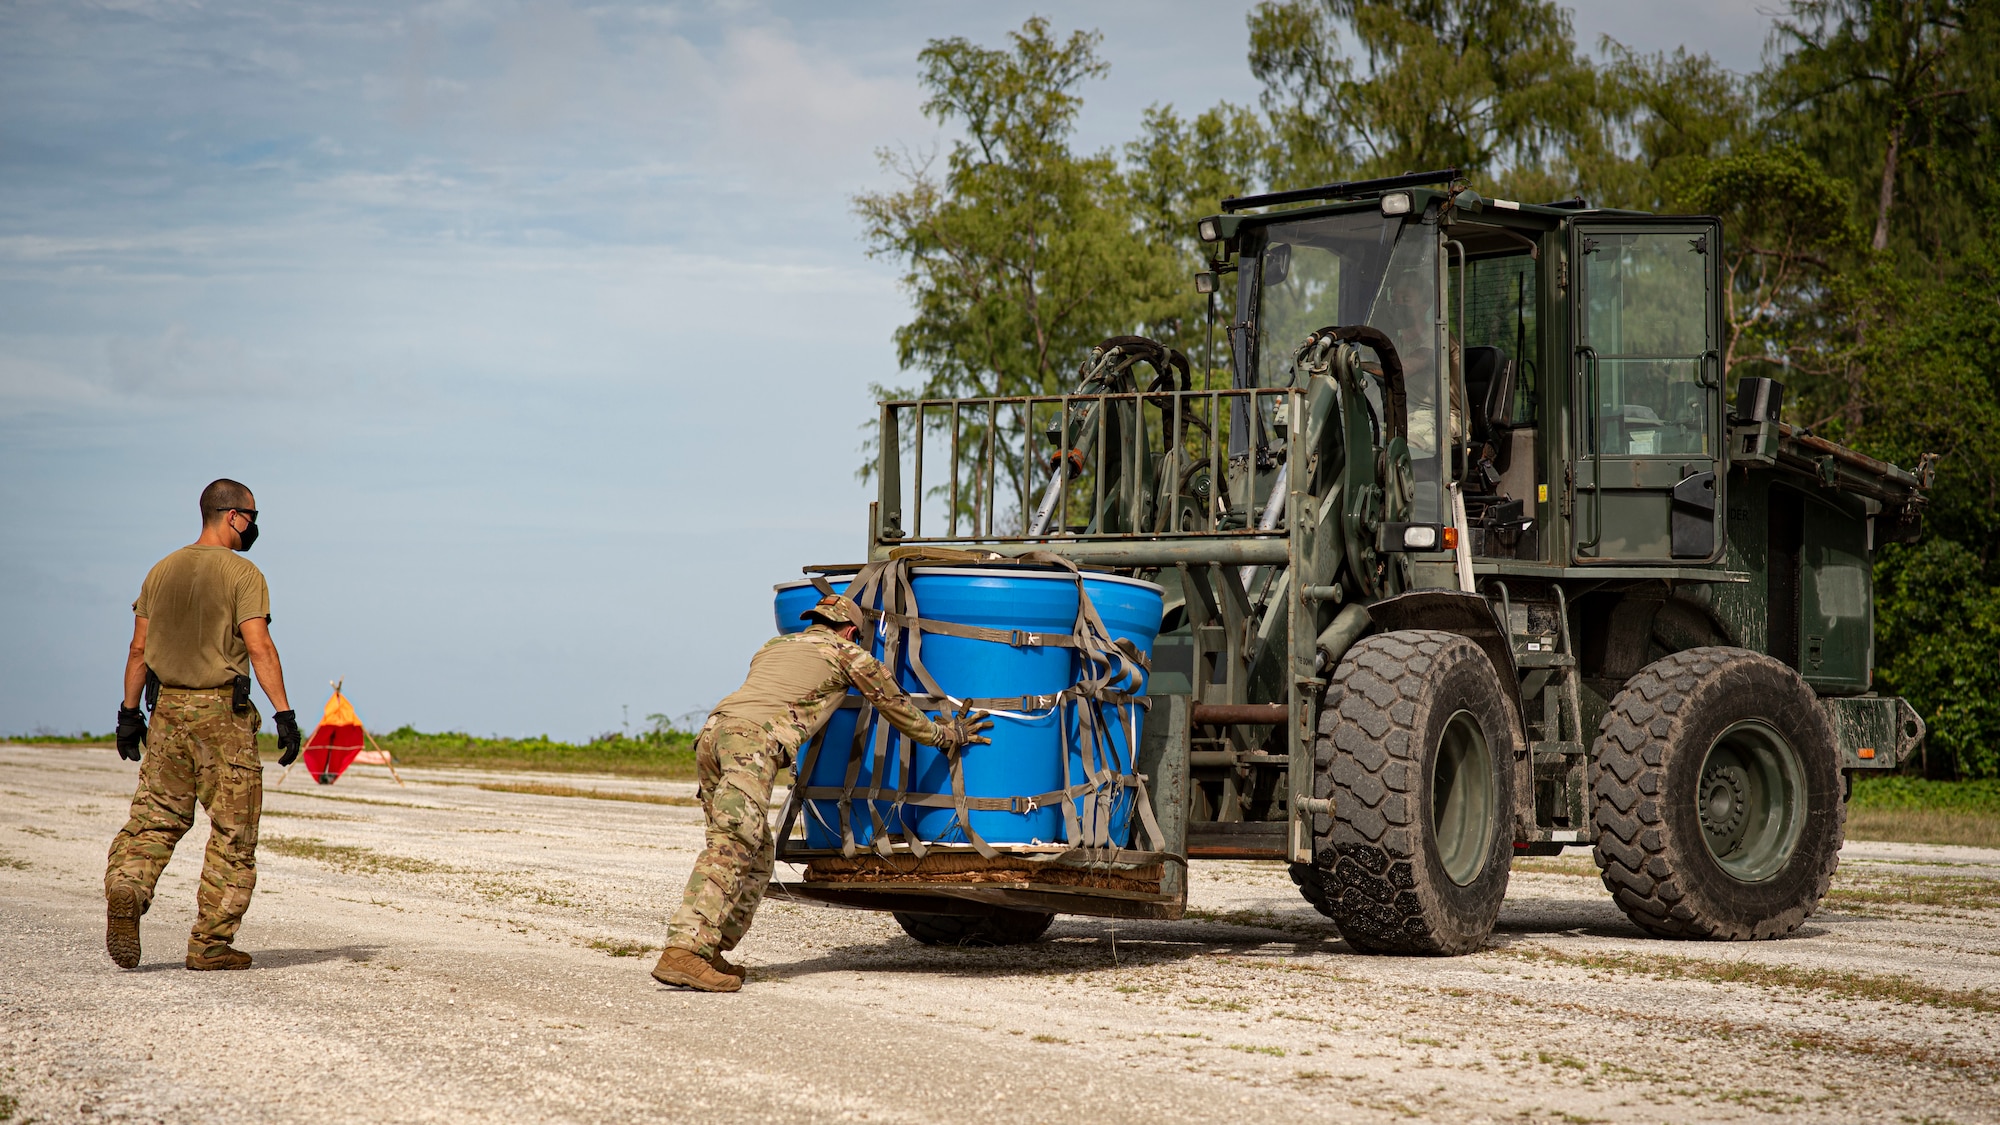 U.S. Air Force Staff Sgt. Vincent Simmons, 36th Contingency Response Squadron aerial port journeyman, secures an airdroped package to a forklift during Cope North 21, Feb. 10, 2021, on Angaur, Palau.